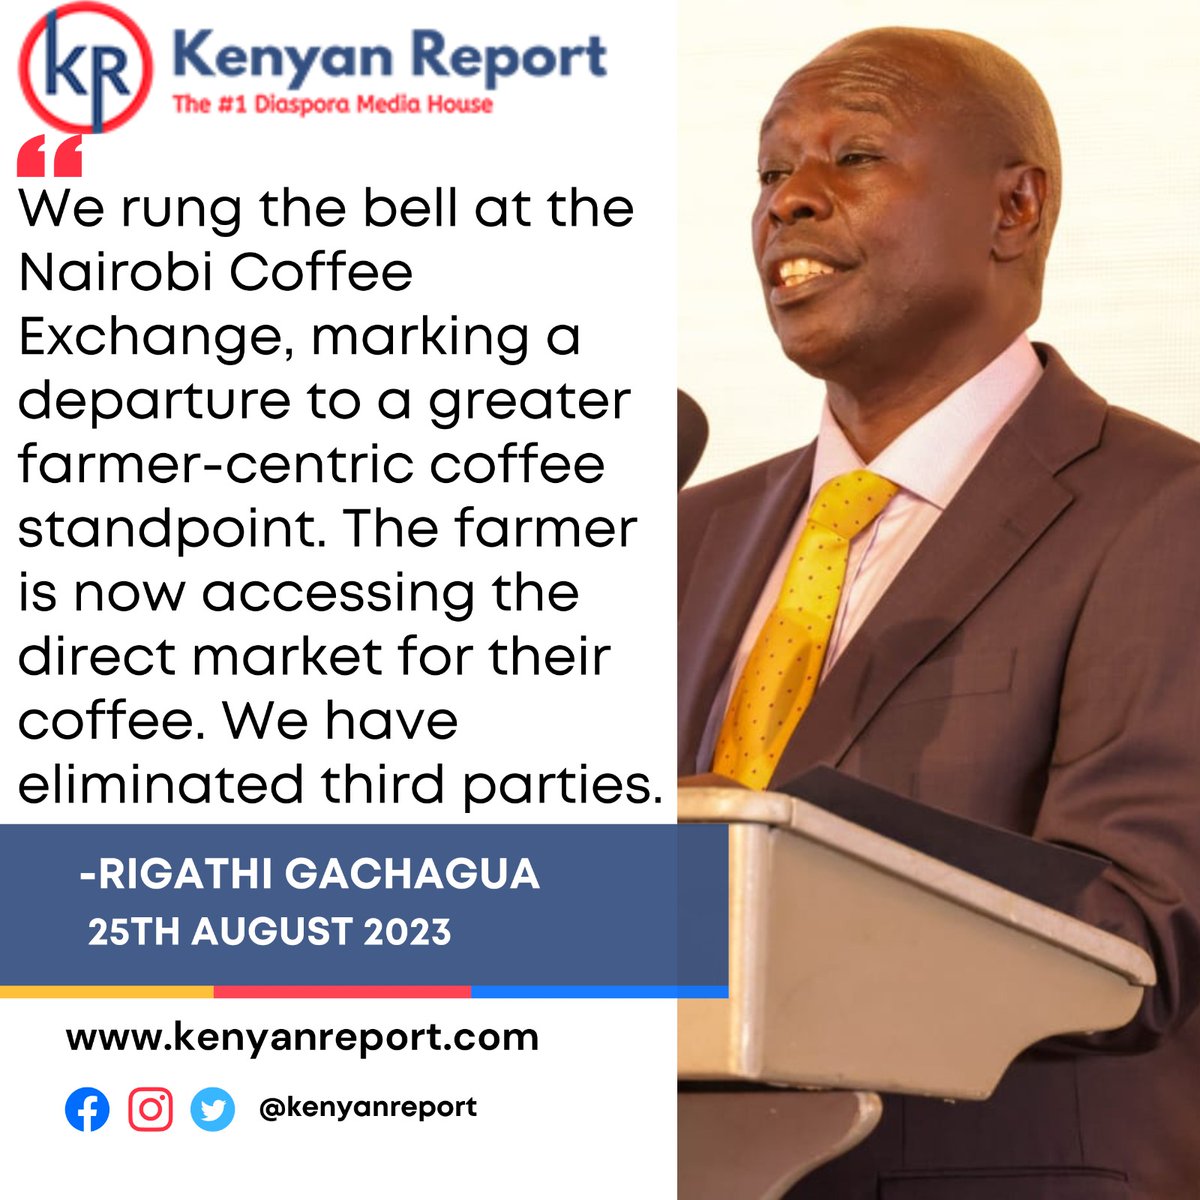 Deputy President Rigathi Gachagua rang the bell at the Nairobi Coffee Exchange, towards a coffee approach that prioritizes farmers. Farmers now have direct access to the market as intermediaries have been removed. #CoffeeRevolution